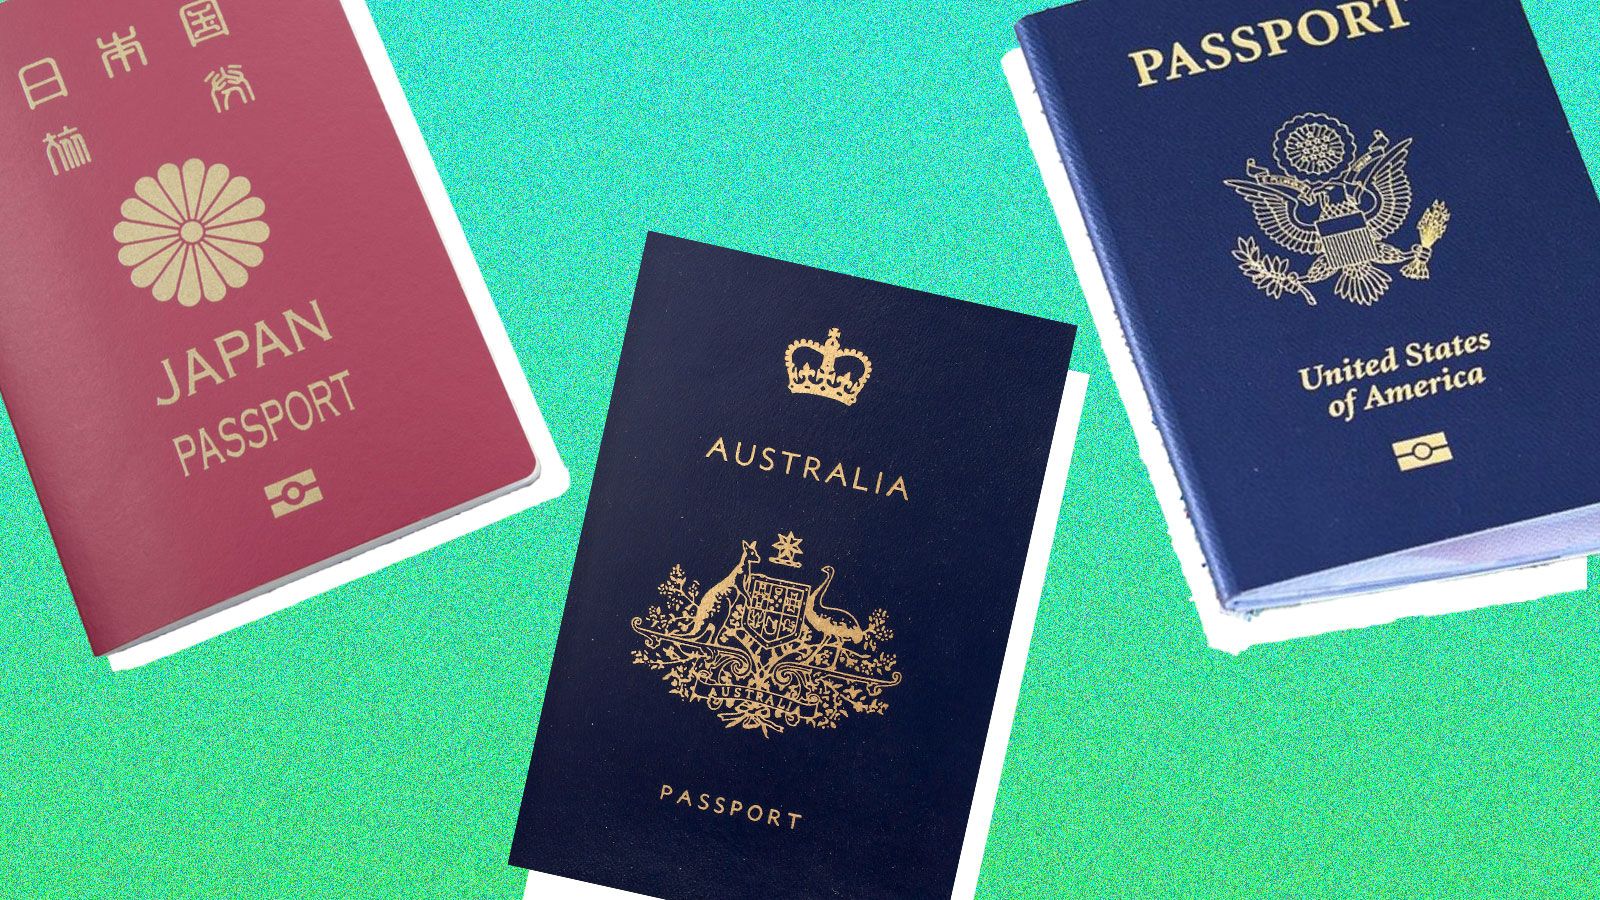 Most Powerful Passports In The World Revealed, Australia Ranked No. 8